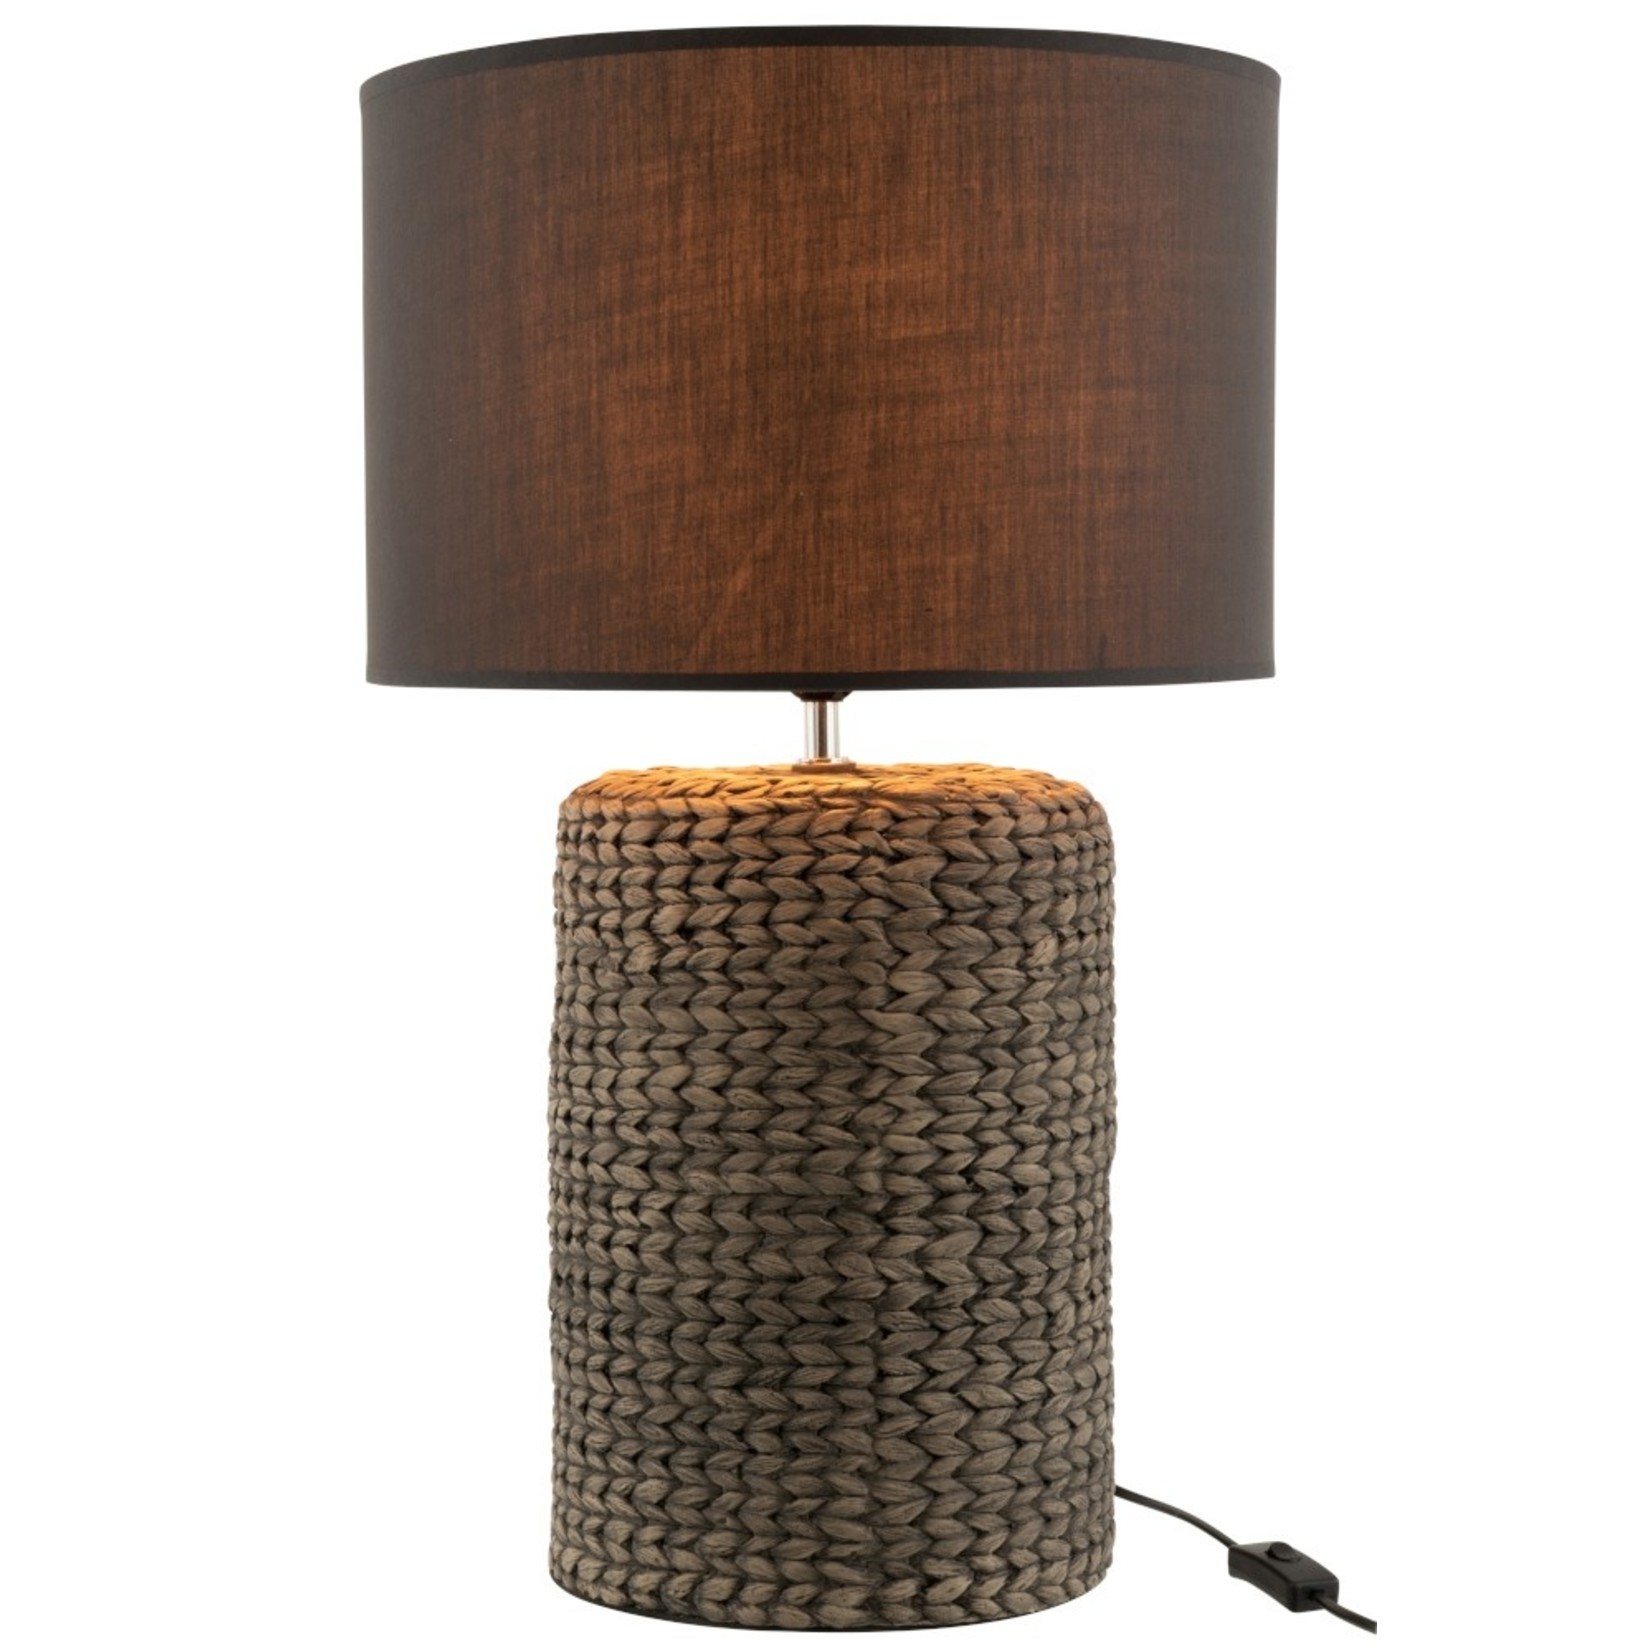 J-Line Table lamp with shade Braided Concrete Dark Gray - Large